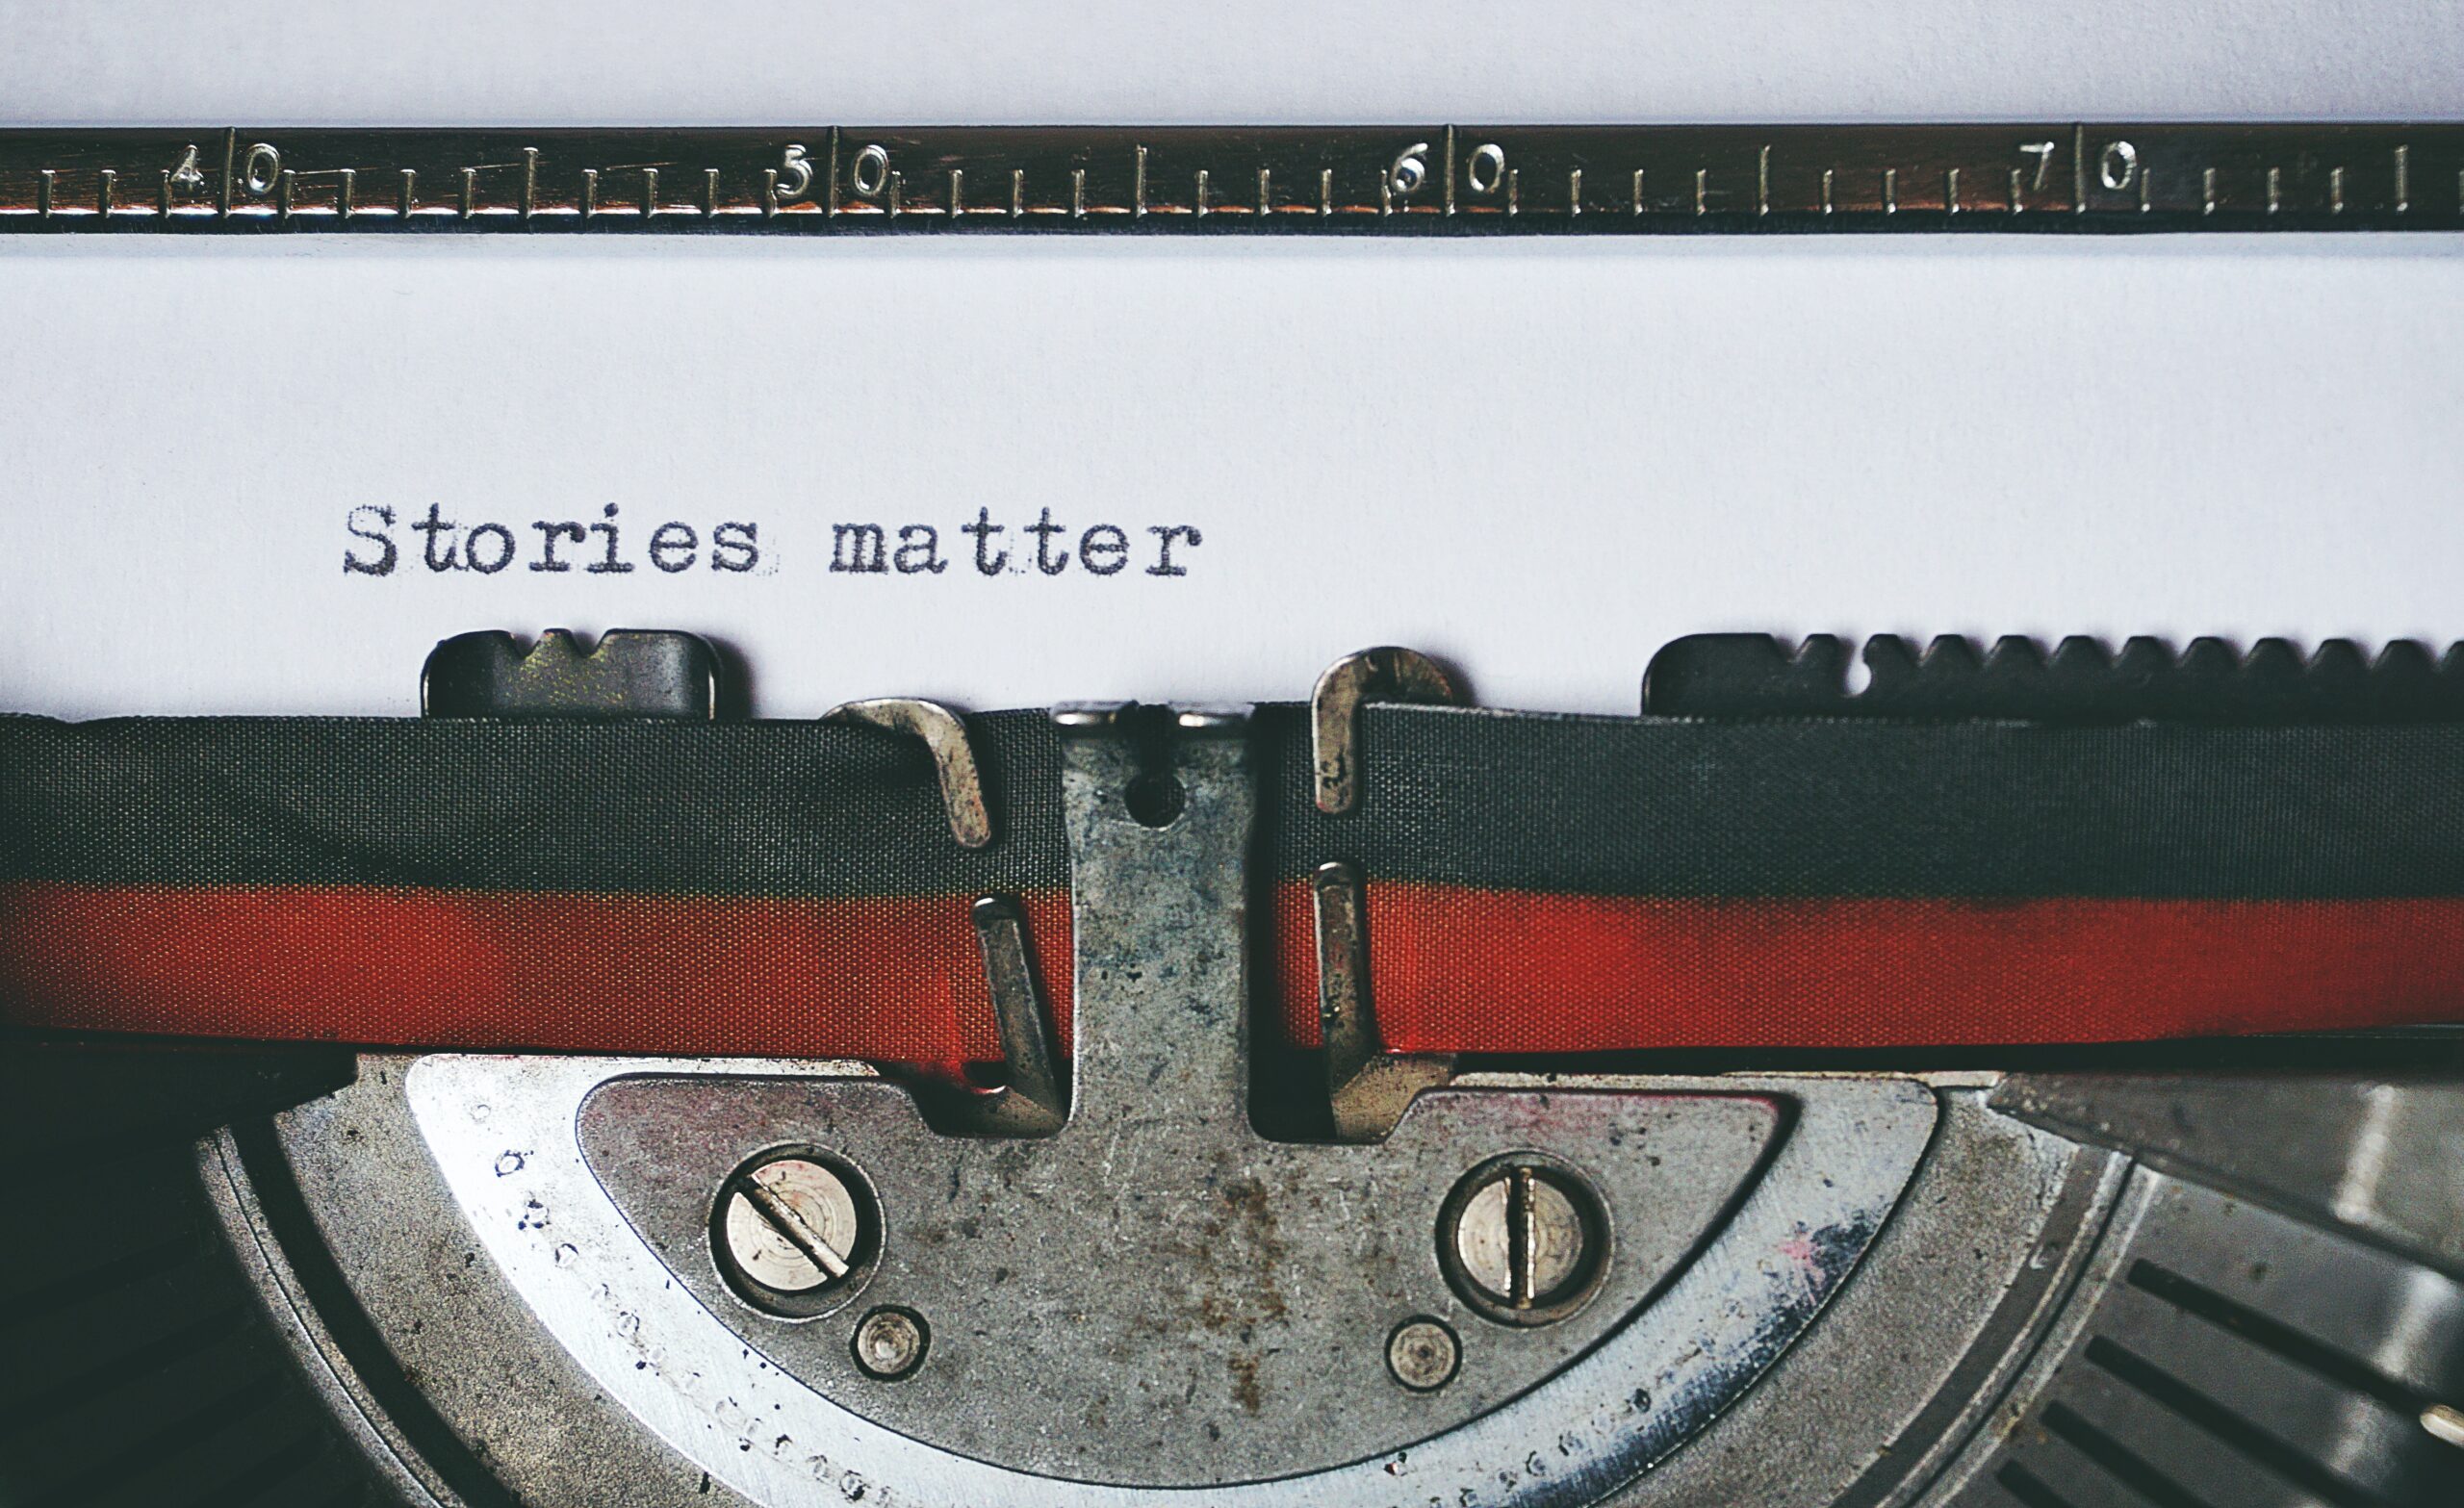 A typewriter spelling out the words "Stories matter". Photo by Suzy Hazelwood